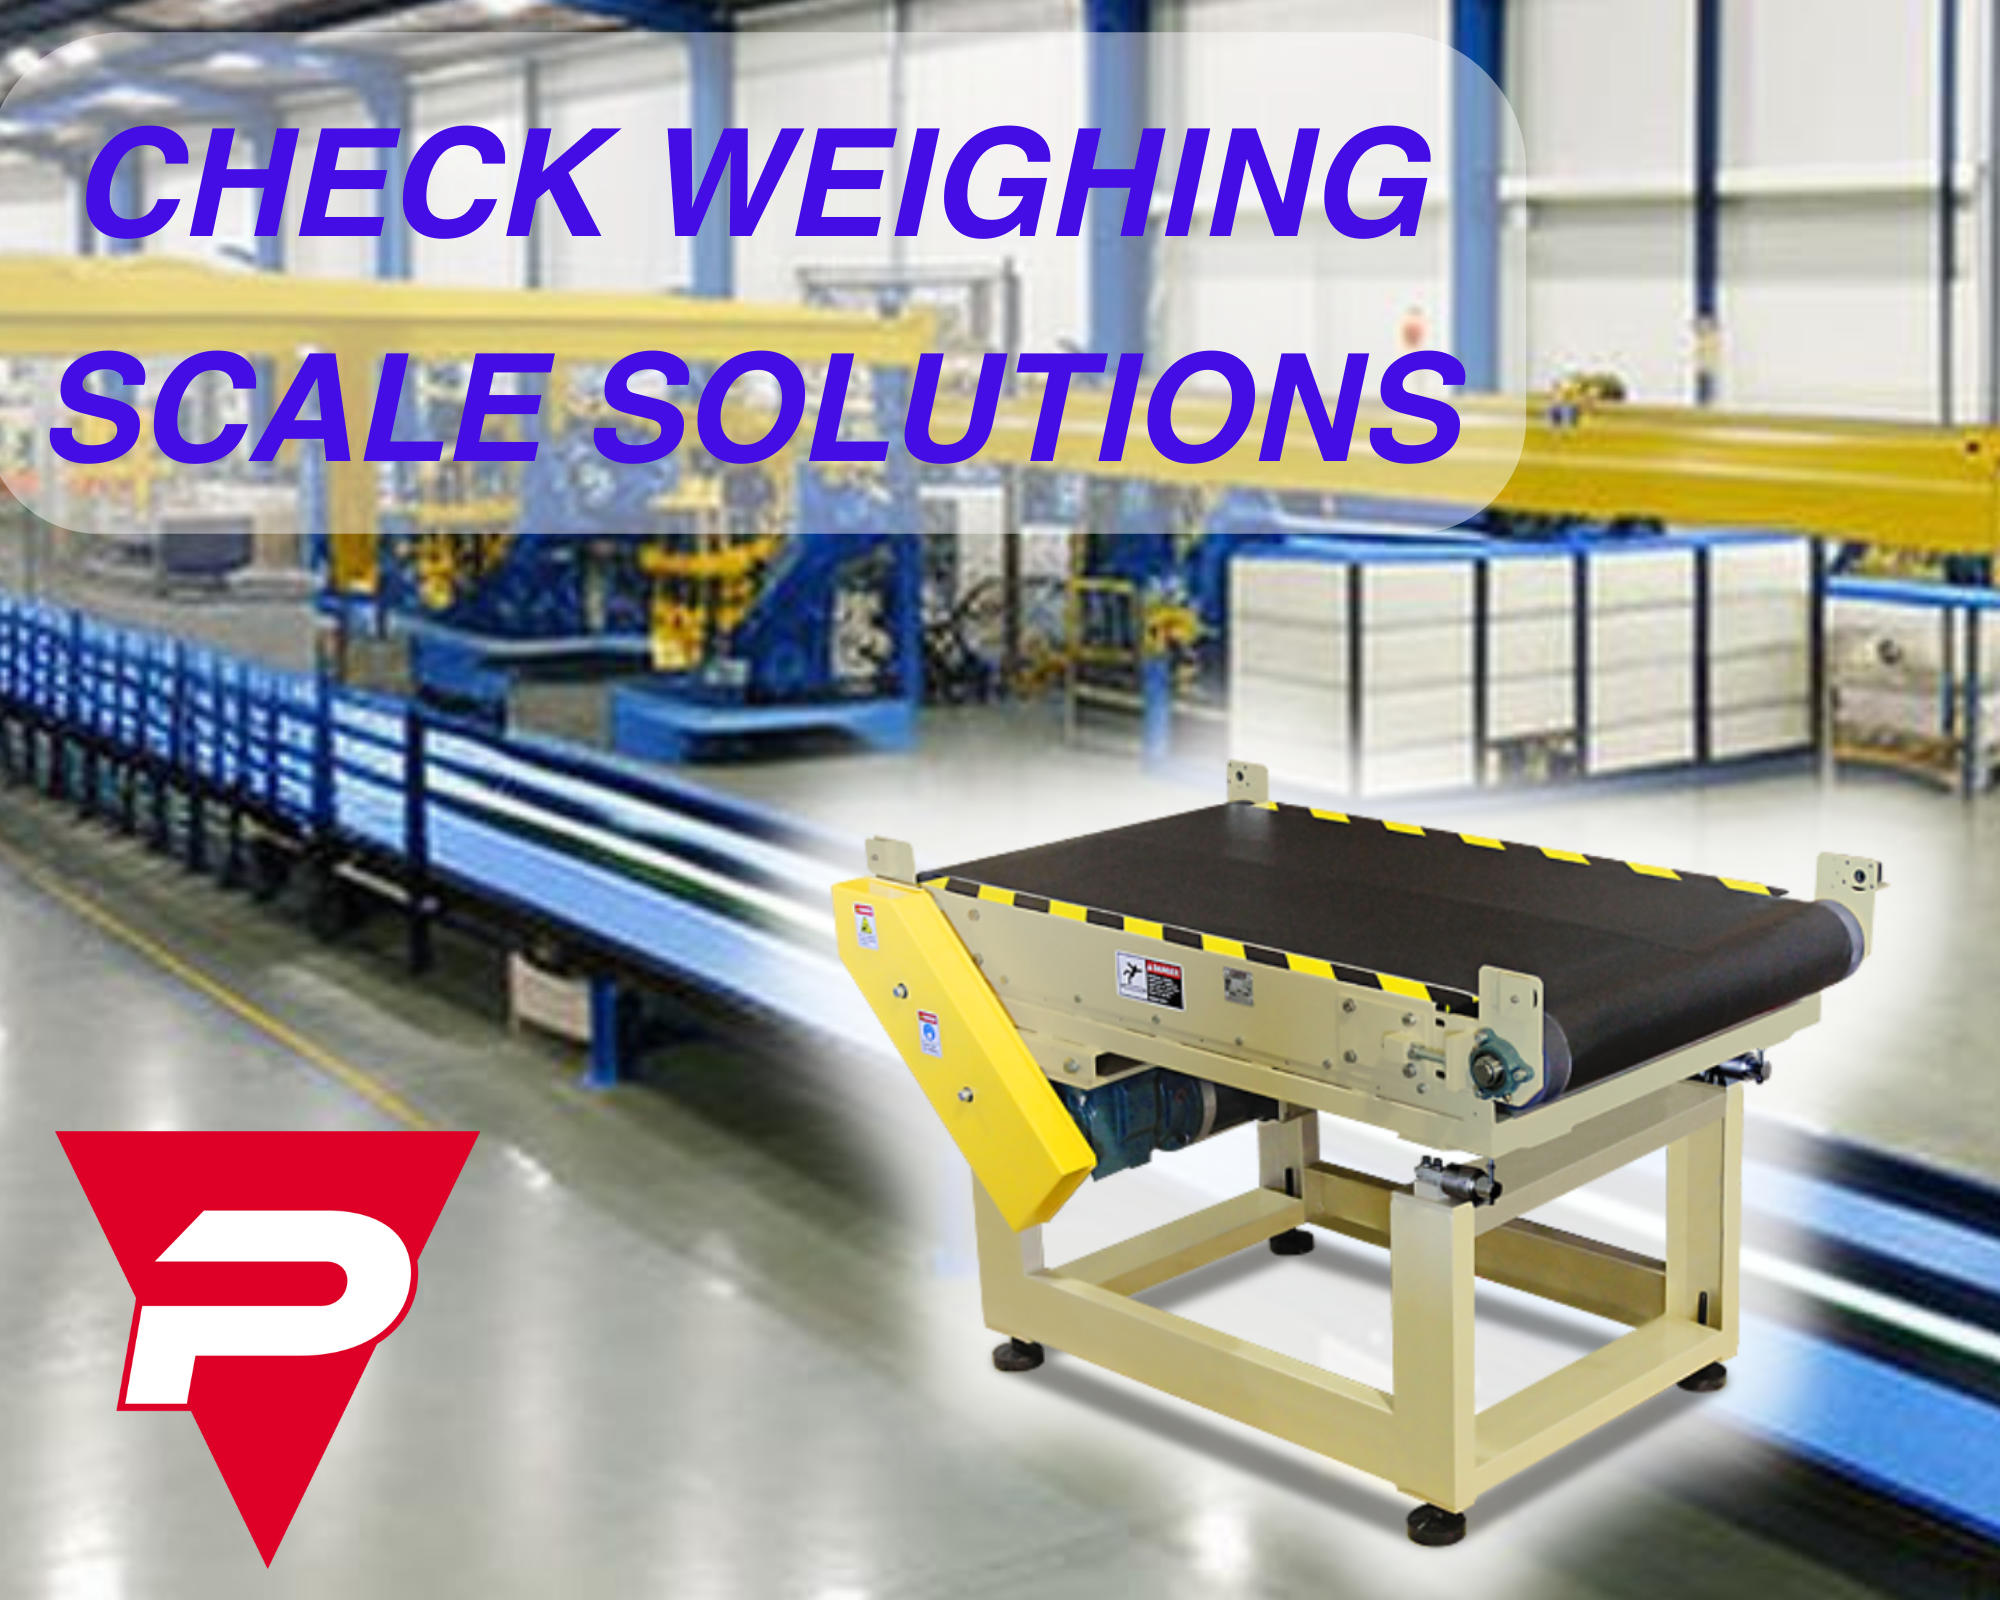 Continuous In-Motion Checkweighers are integrated into conveyor lines to ensure quality in packaging lines in industries such as food production to commercial manufacturing.